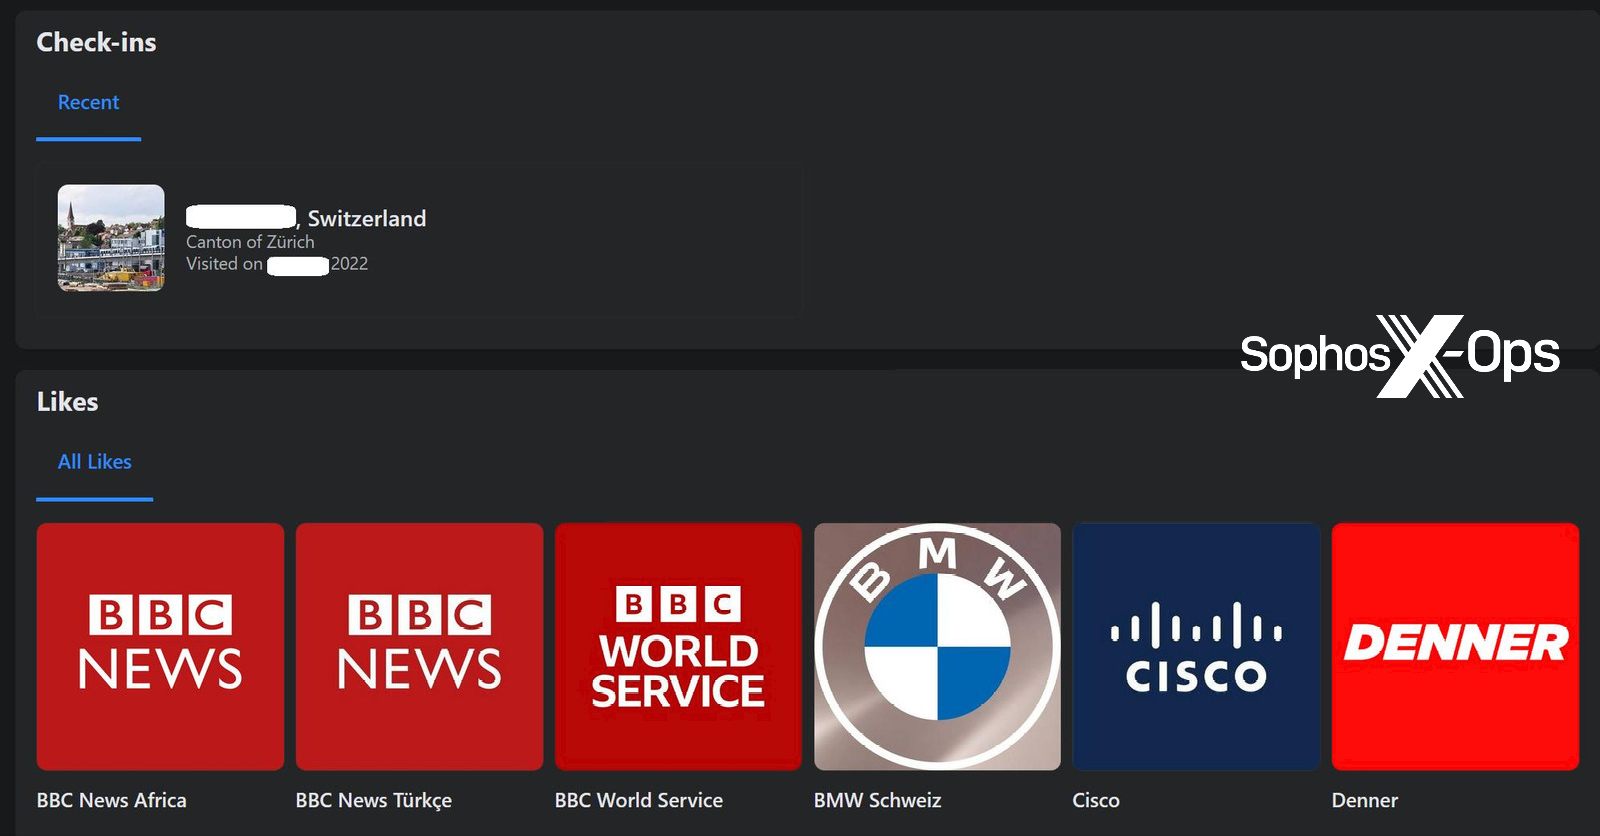 A screen showing the persona's check-ins (Switzerland) and likes (BBC News, BMW, Cisco, Denner). These are used to give the persona credibility and enhance the larger social-engineering effort.